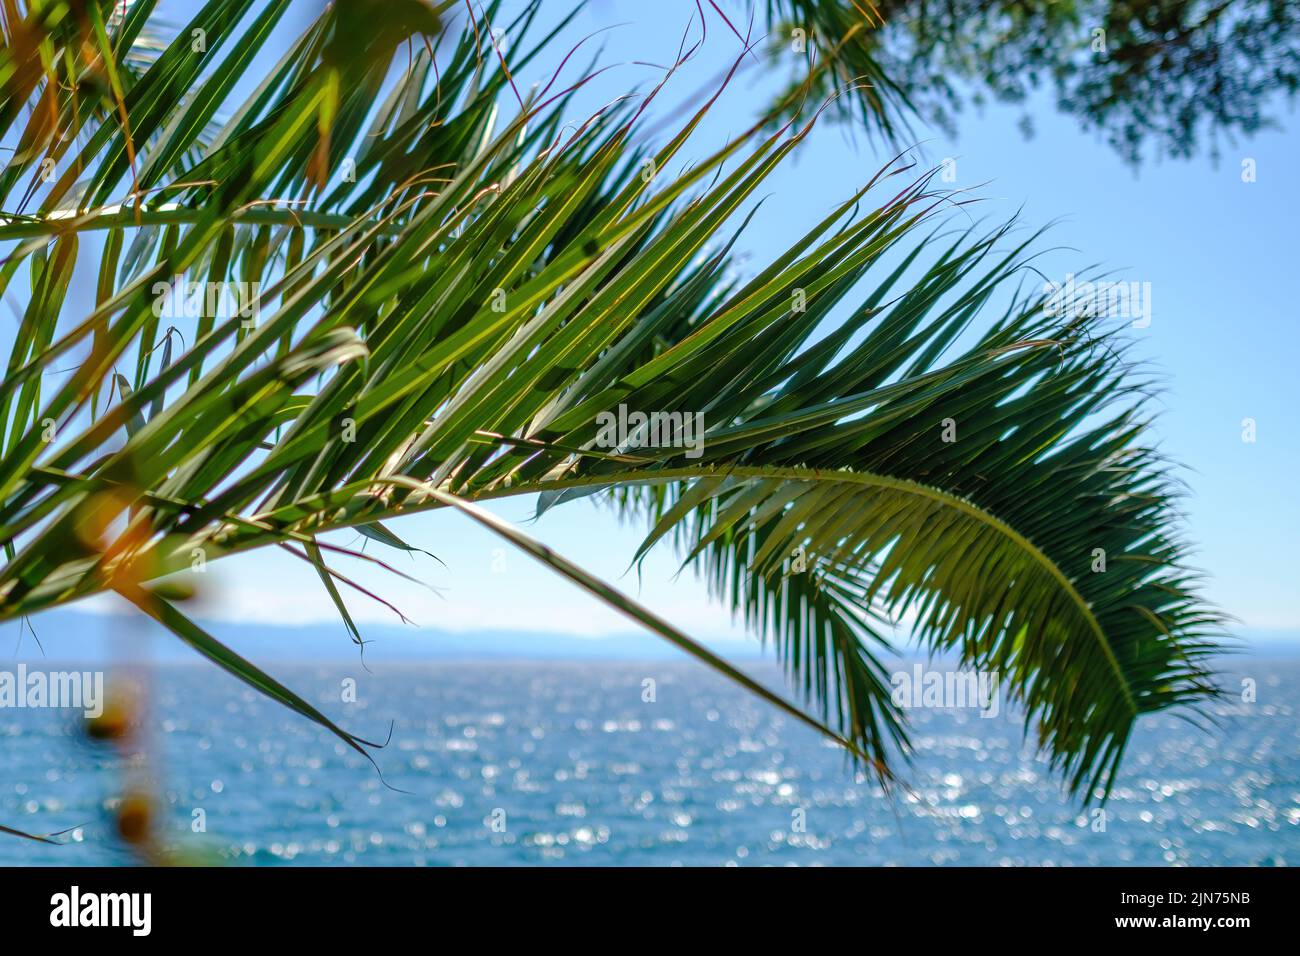 Green palm branches sway in light wind against blue seascape. Deep sea reflects clear blue sky. Water attracts attention with vibrant colours Stock Photo